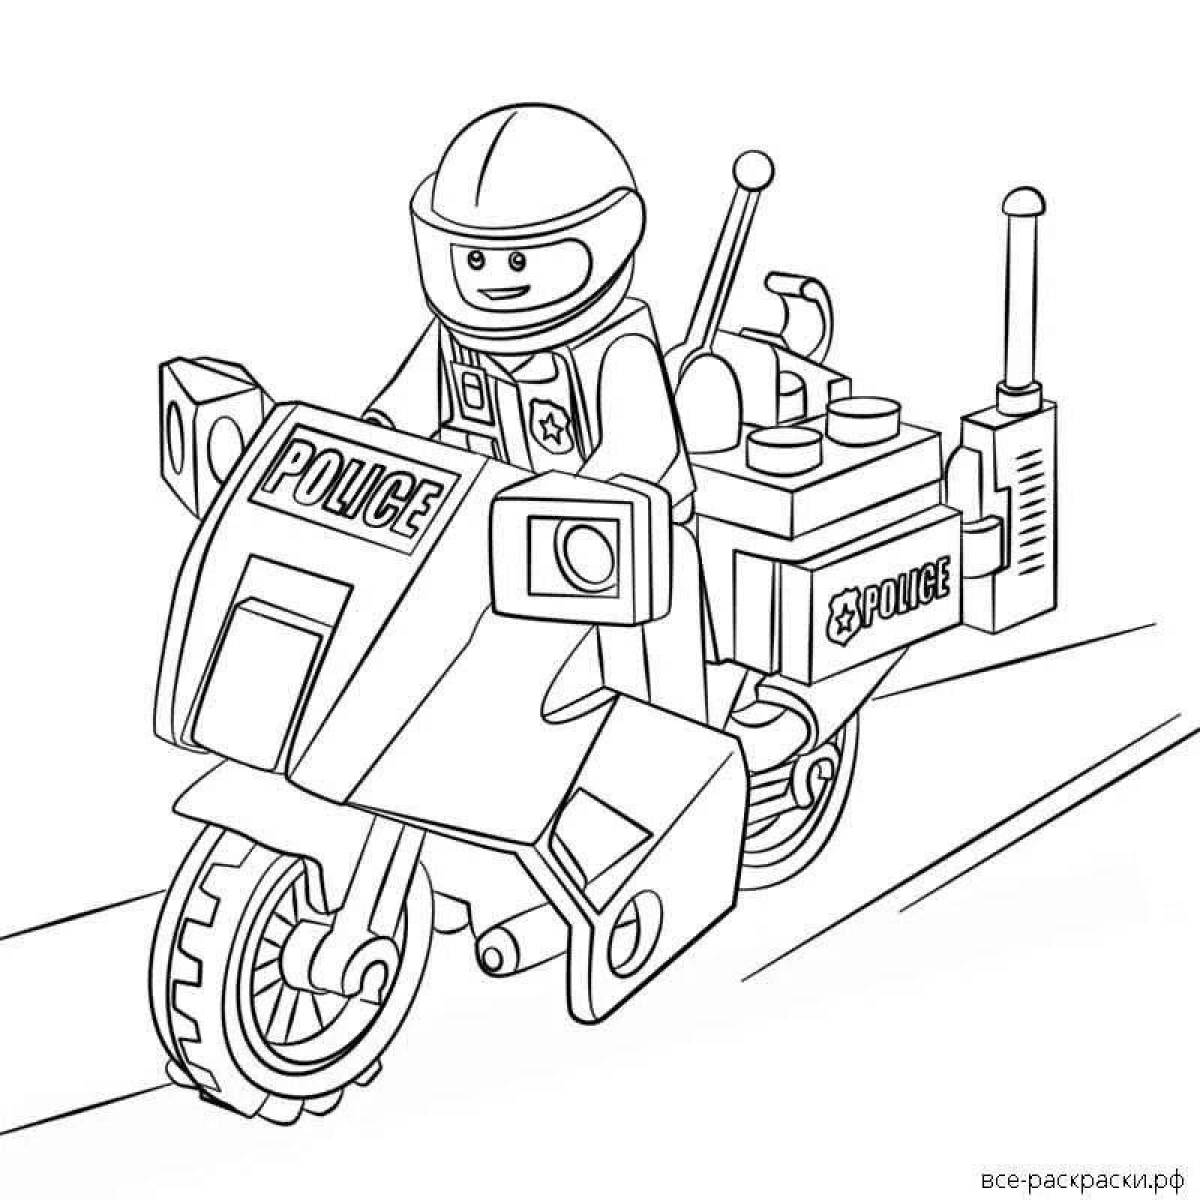 Lego city police animated coloring page